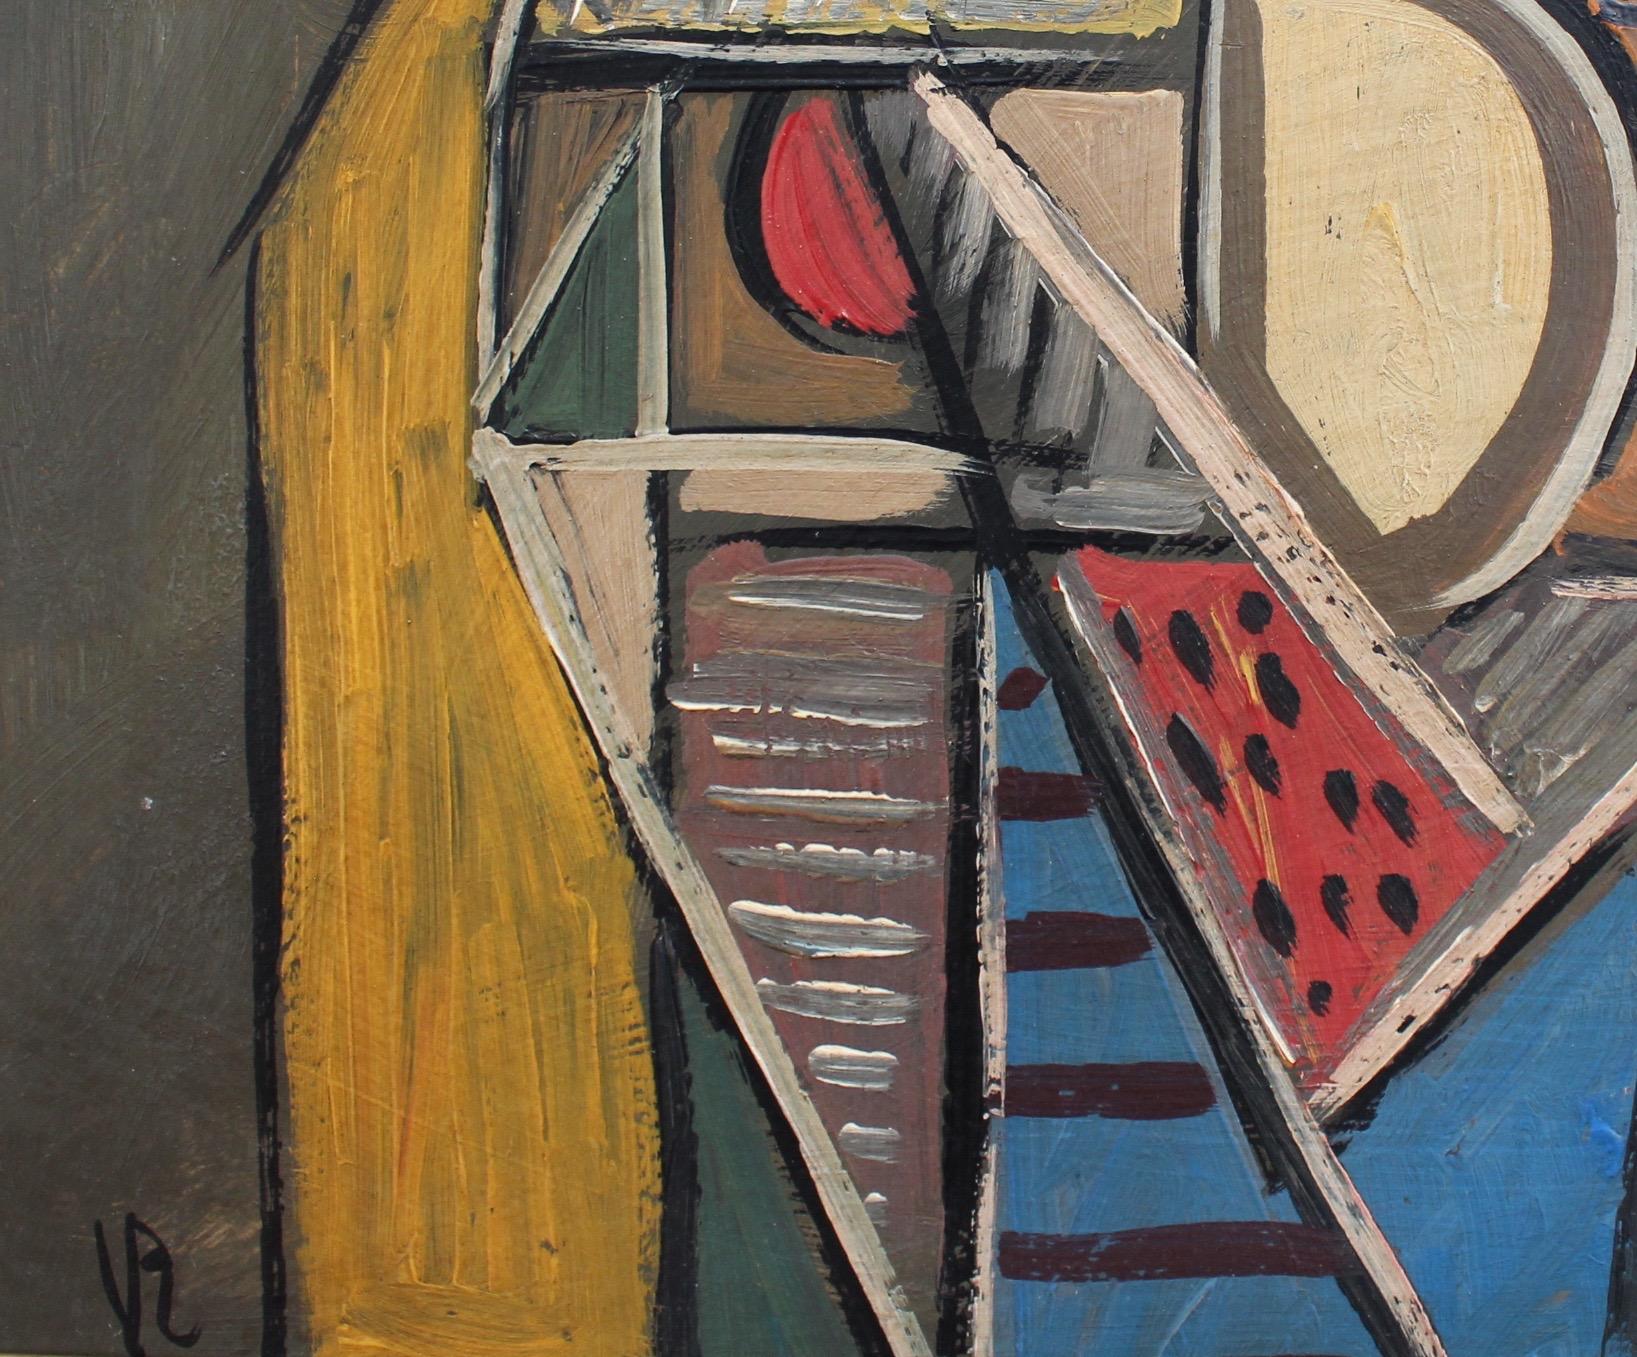 'Cubist Instrumentalist', oil on board (circa 1940s - 50s), by artist with initials V.R. The cubist movement as conceived by Picasso and Georges Braque in the early 20th-century used flat planes of colour and complex puzzle-like compositions echoing